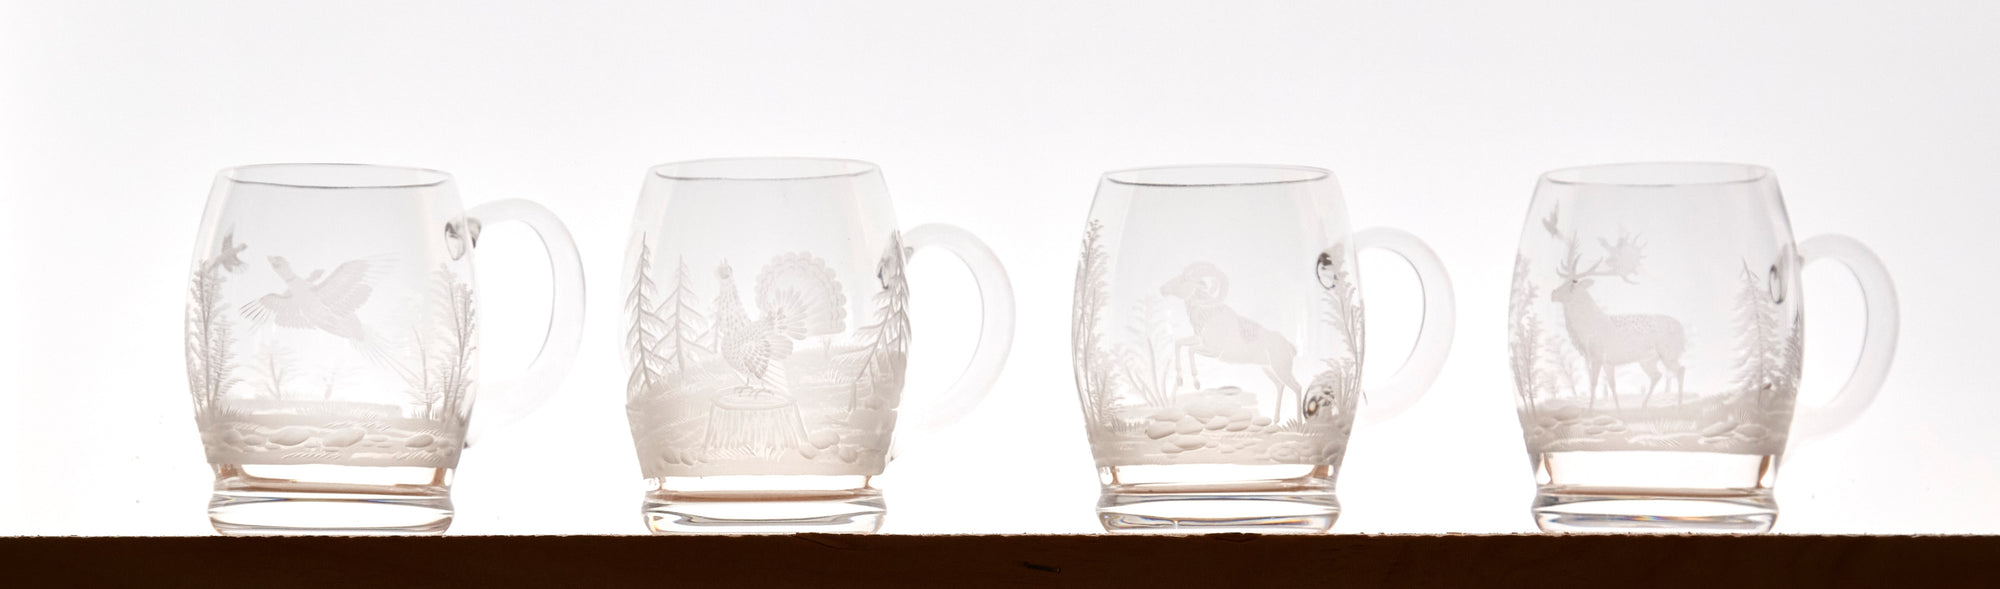 Etched Crystal Mugs - Misc. Glass